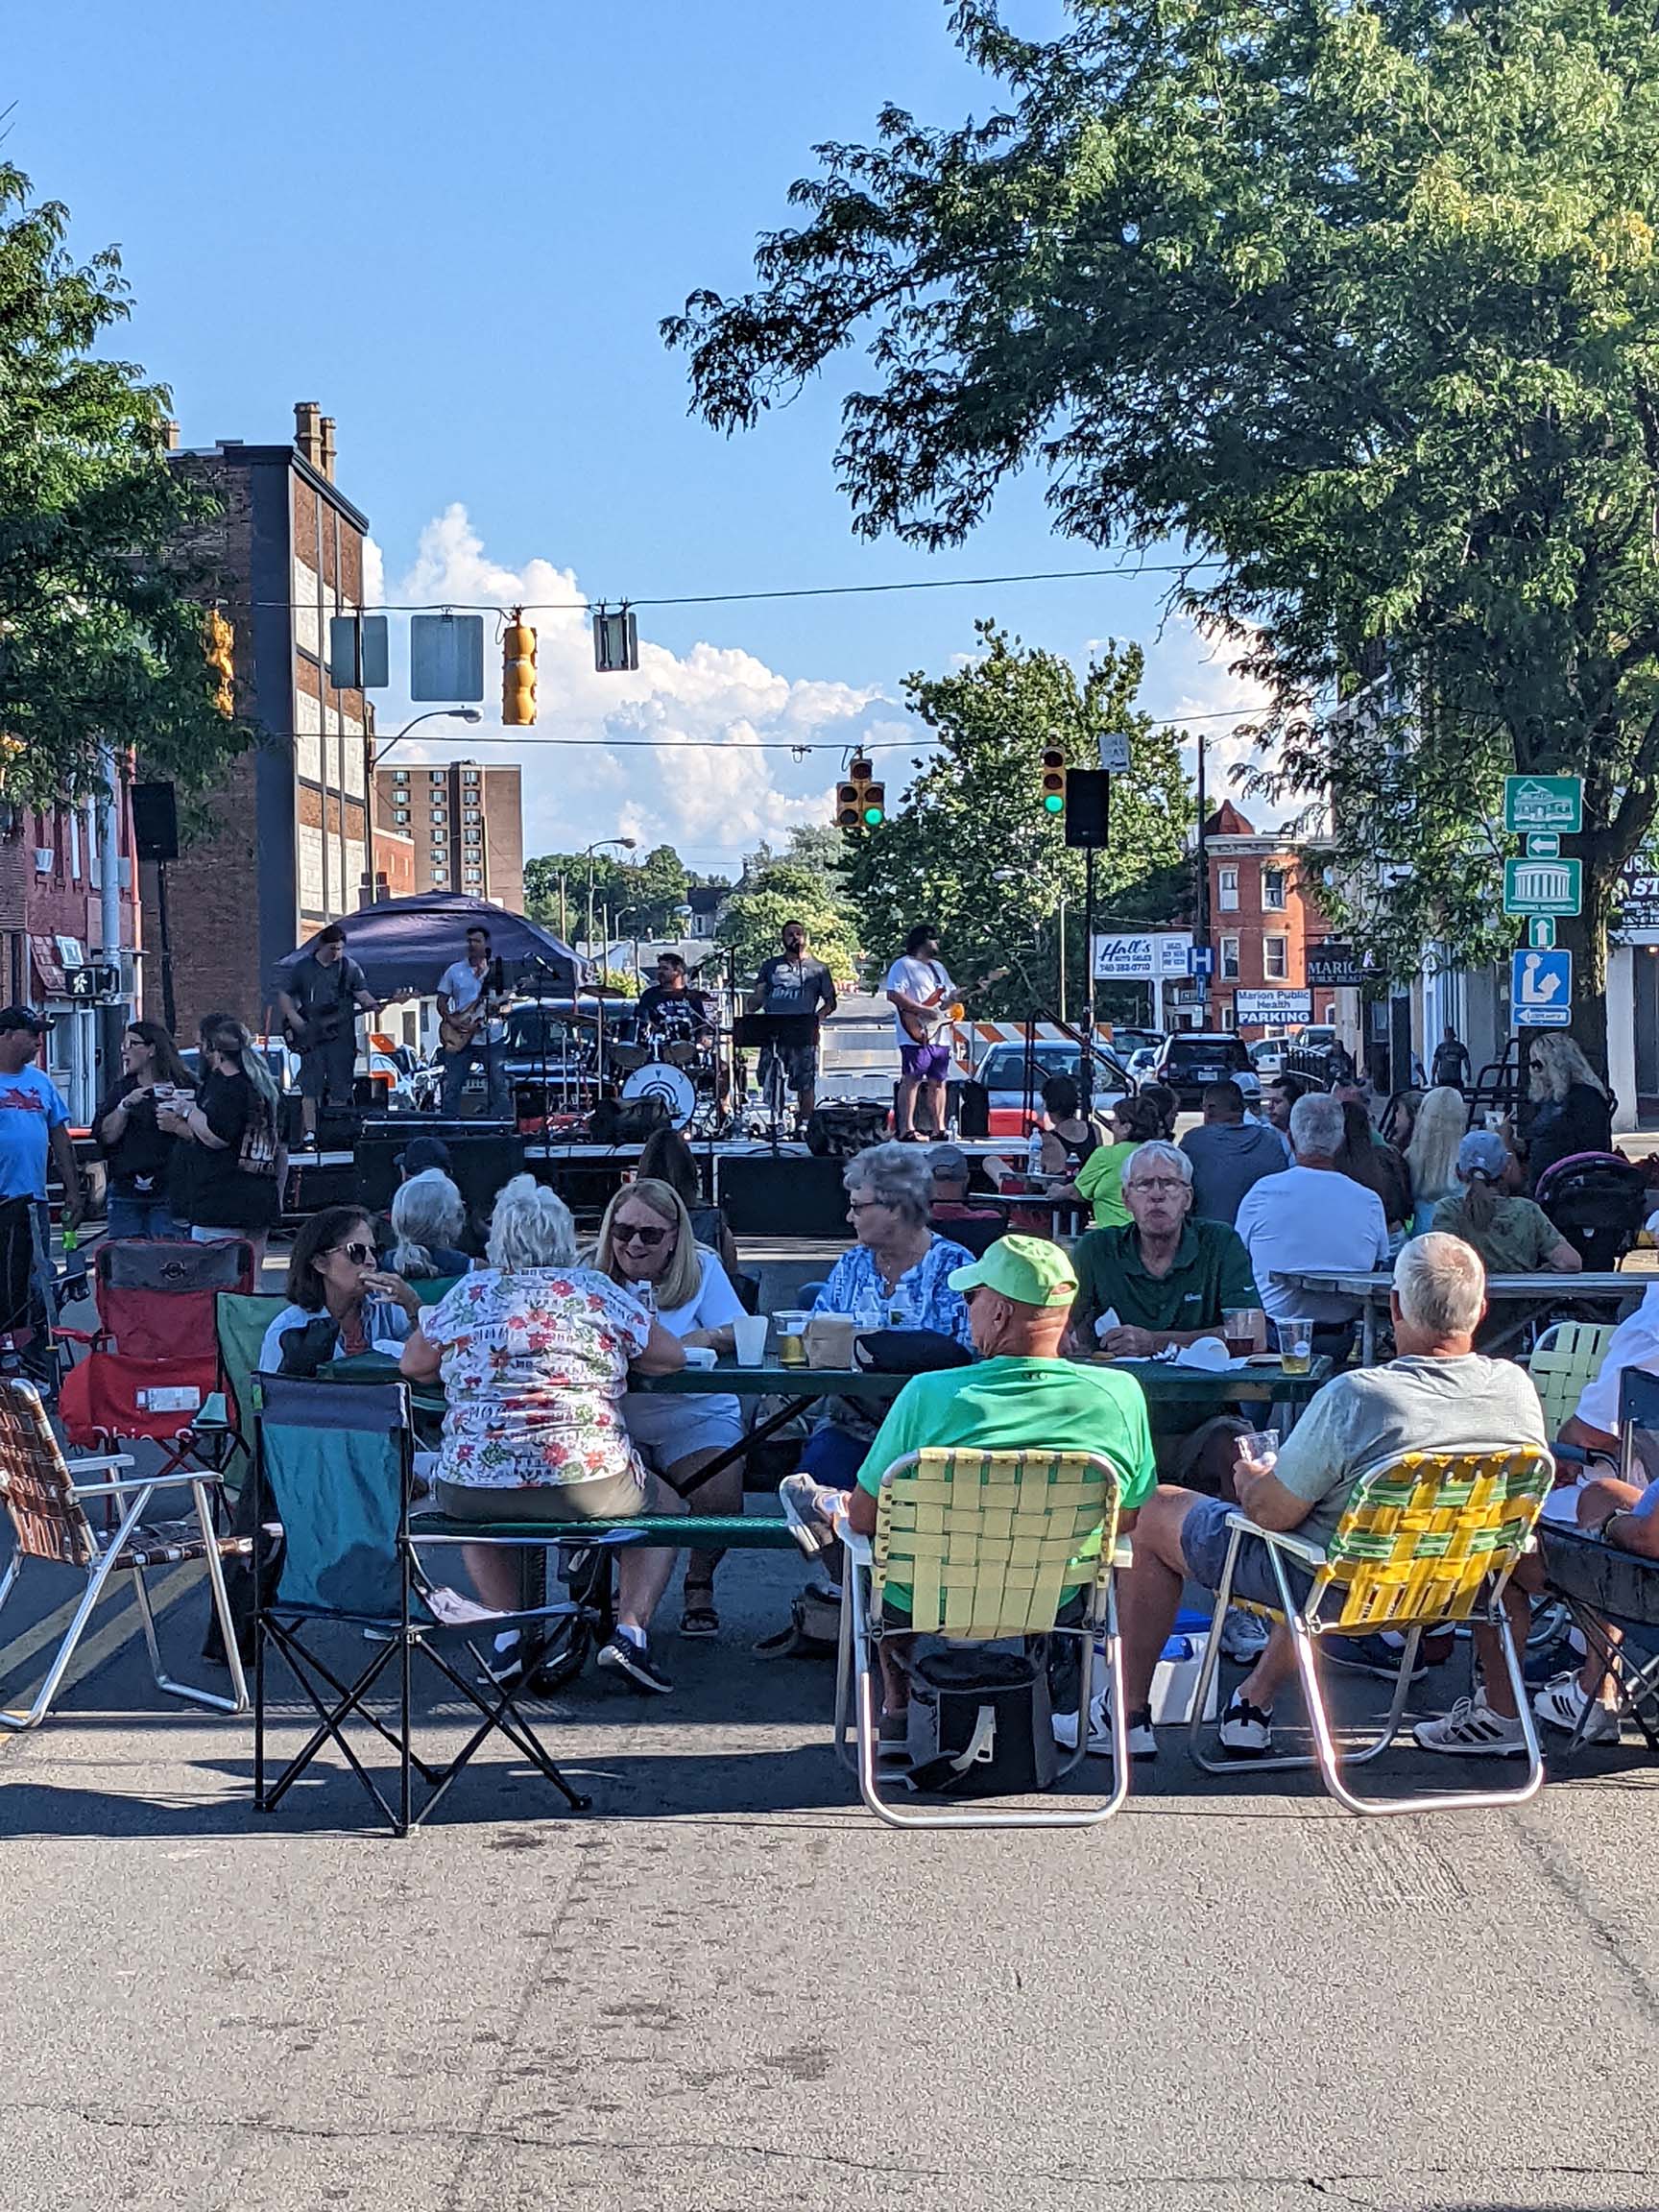 A crowd in the street of downtown Marion, Ohio enjoying live music during a Third Thursday event.